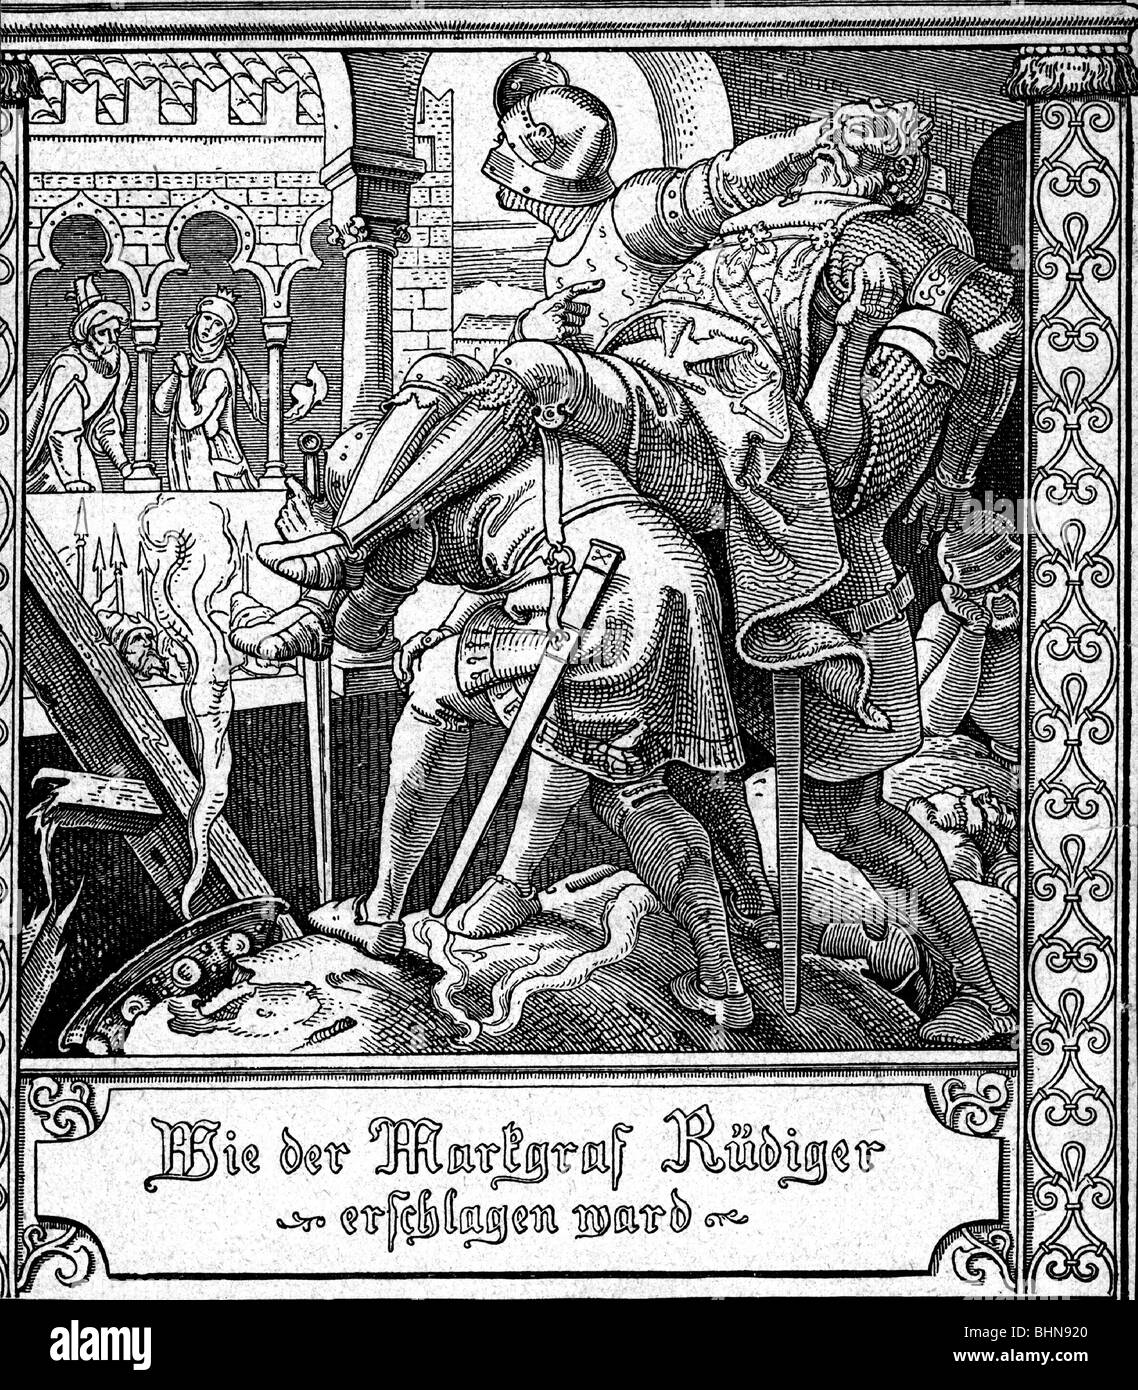 literature, Nibelungen, Kriemhild's revenge, fight at Etzel Castle, death by margrave Ruediger von Bechlaren, woodcut by Alfred Rethel (1816 - 1859), 19th century, historic, historical, combat, bloodbath, carnage, slaughter, massacre, butchery, saga, legend, legends, myth, mythology, Rudger von Poechlarn, Pochlarn, Bechlarn, fallen knight, medieval times, Middle Ages, hero, death body, The Nibelungs, Nibelung, people, Stock Photo